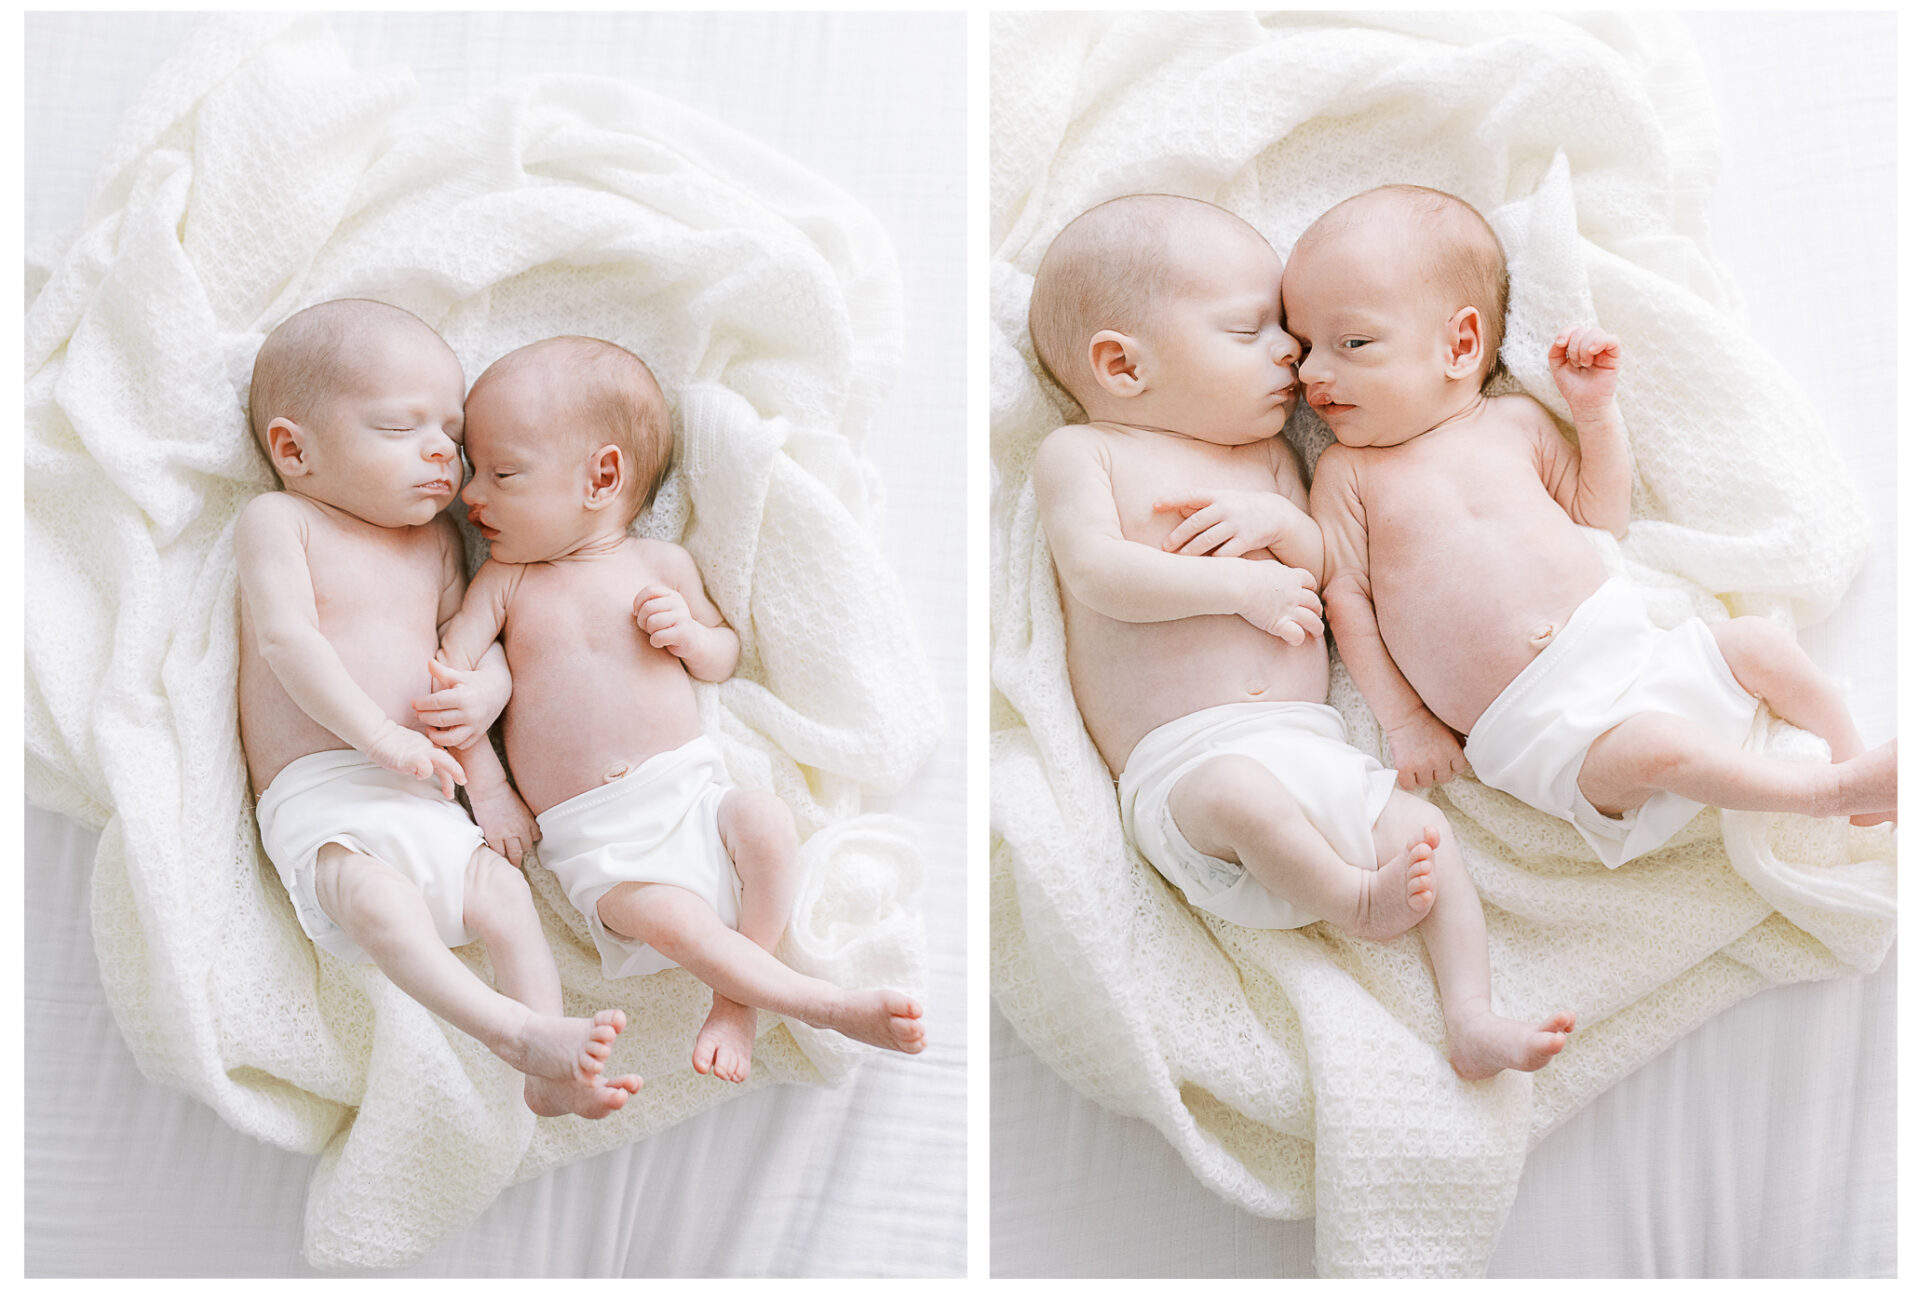 Newborn baby boy photography session | Baby brothers snuggling together on a blanket